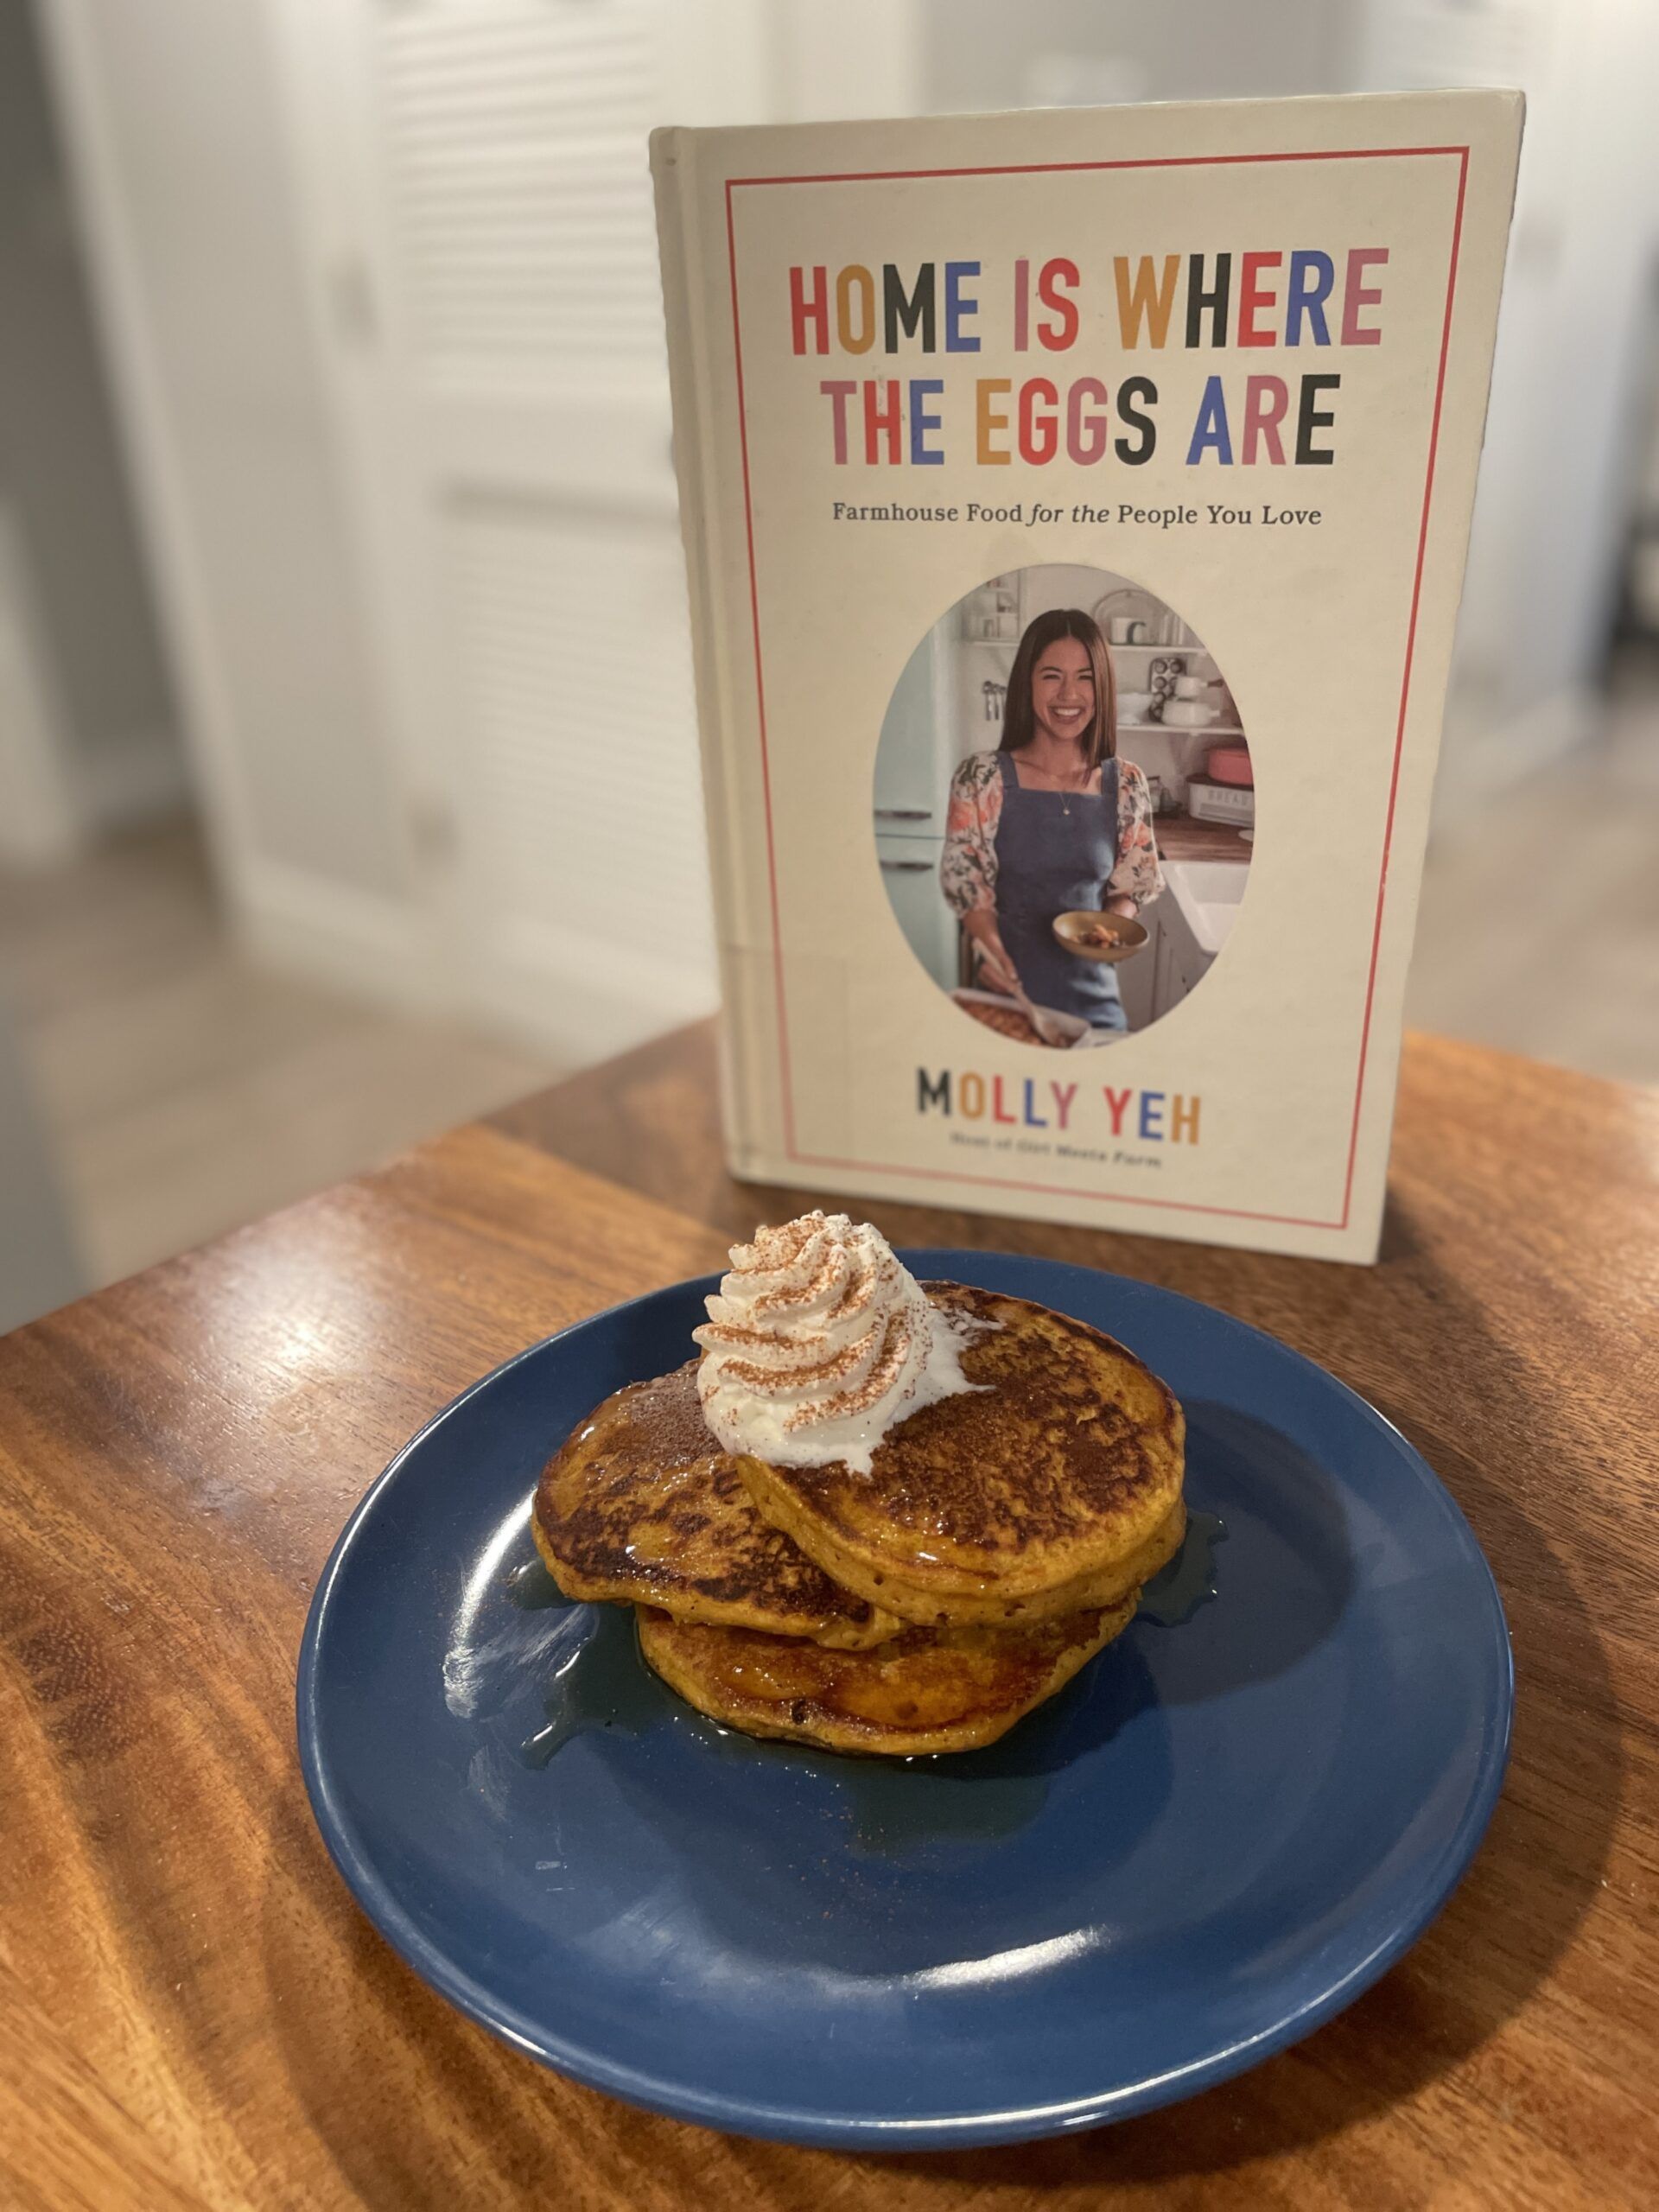 A small blue plate of orangey brown pancakes topped with syrup and whipped cream on a wooden table by the cookbook Home is Where the Eggs Are